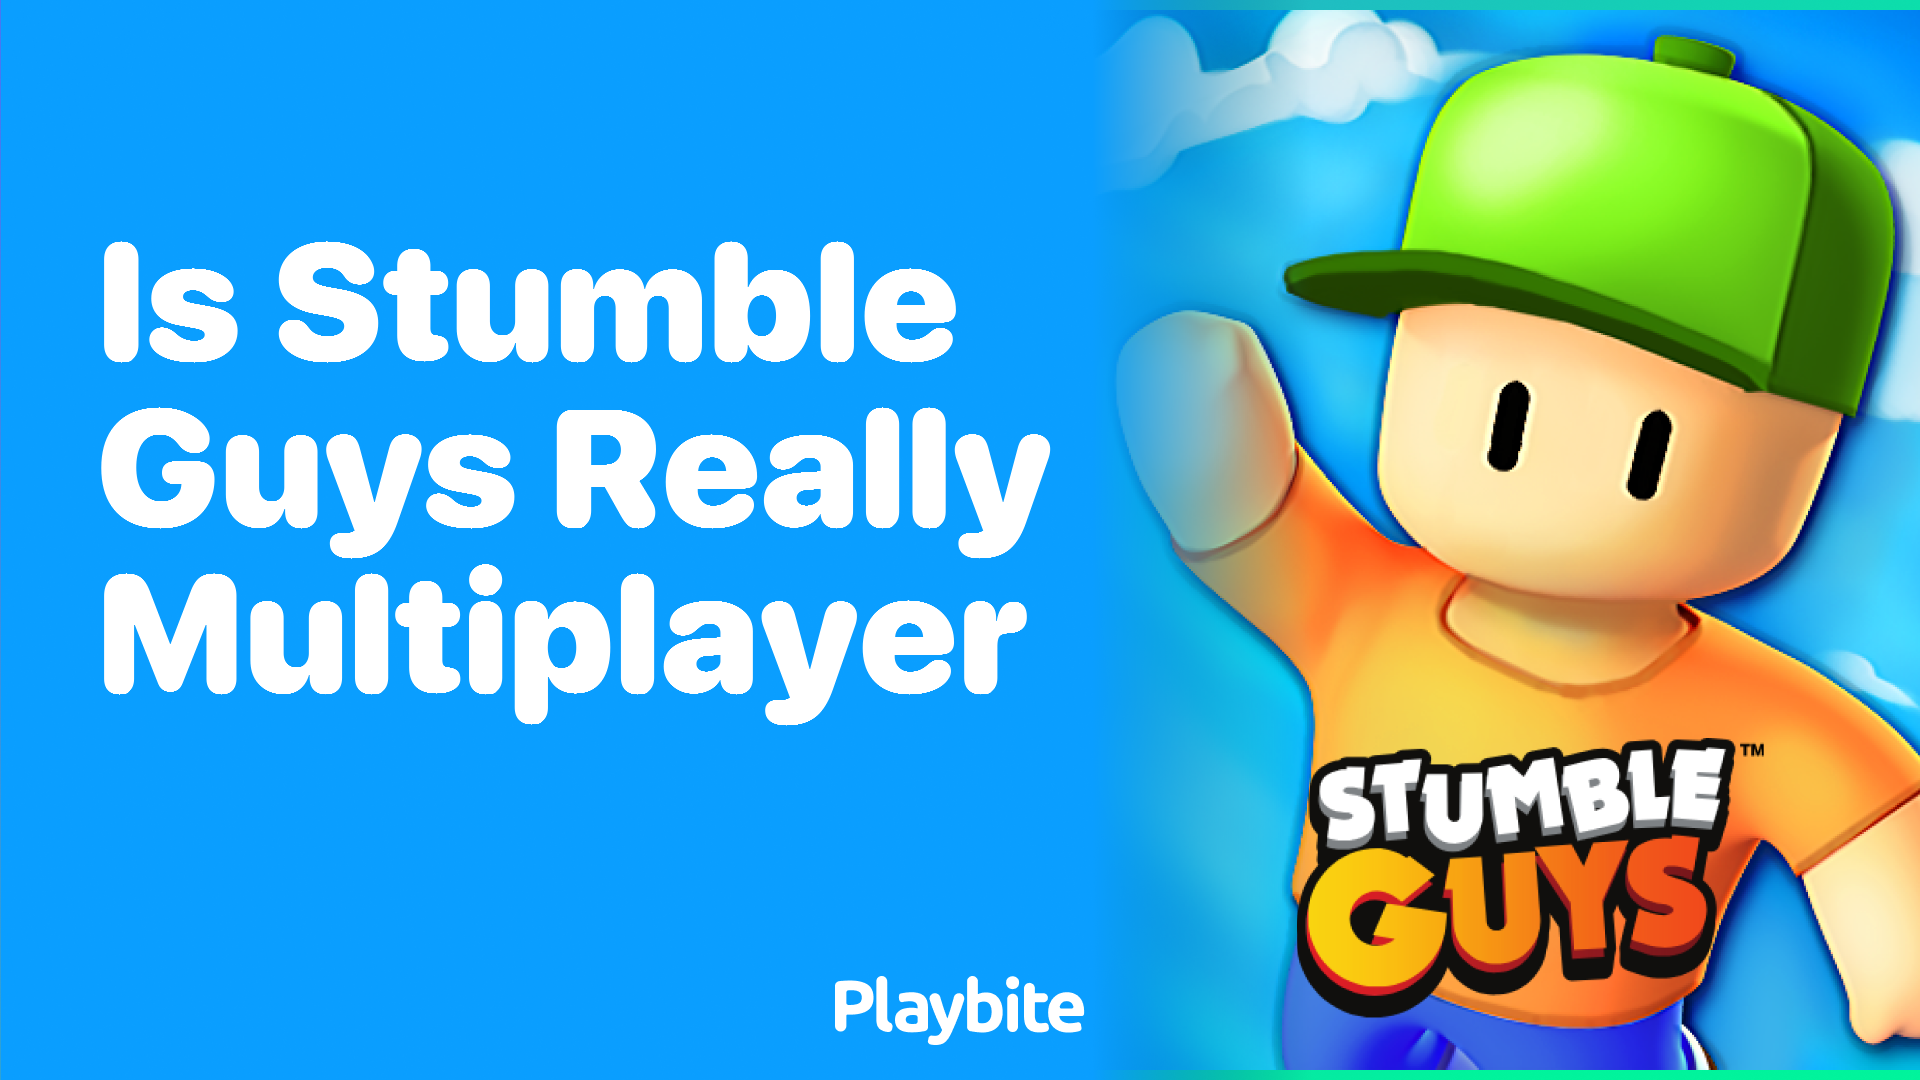 Is Stumble Guys Really Multiplayer?